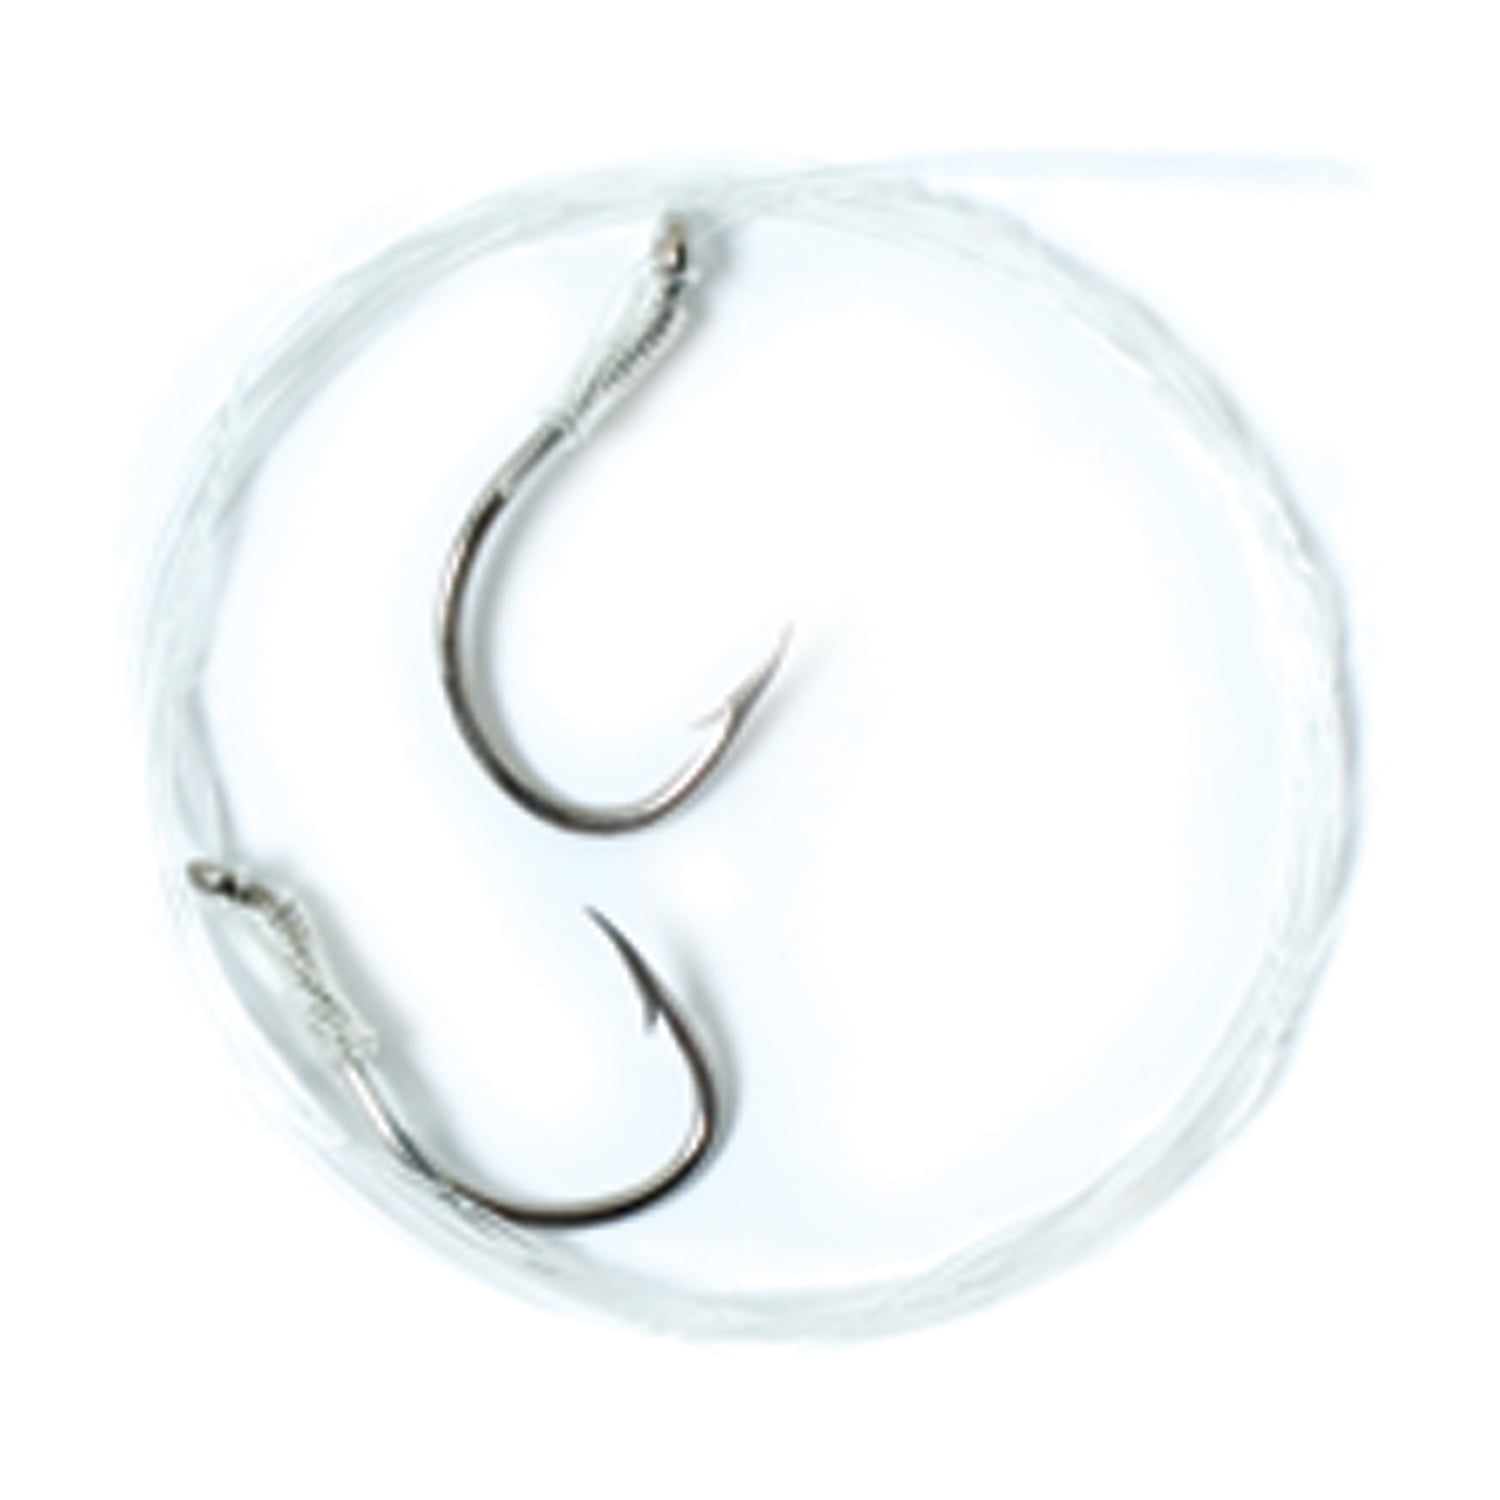 Eagle Claw Lazer Sharp Circle Offset Hook, Sea Guard, Size 3/0, 40 Pack